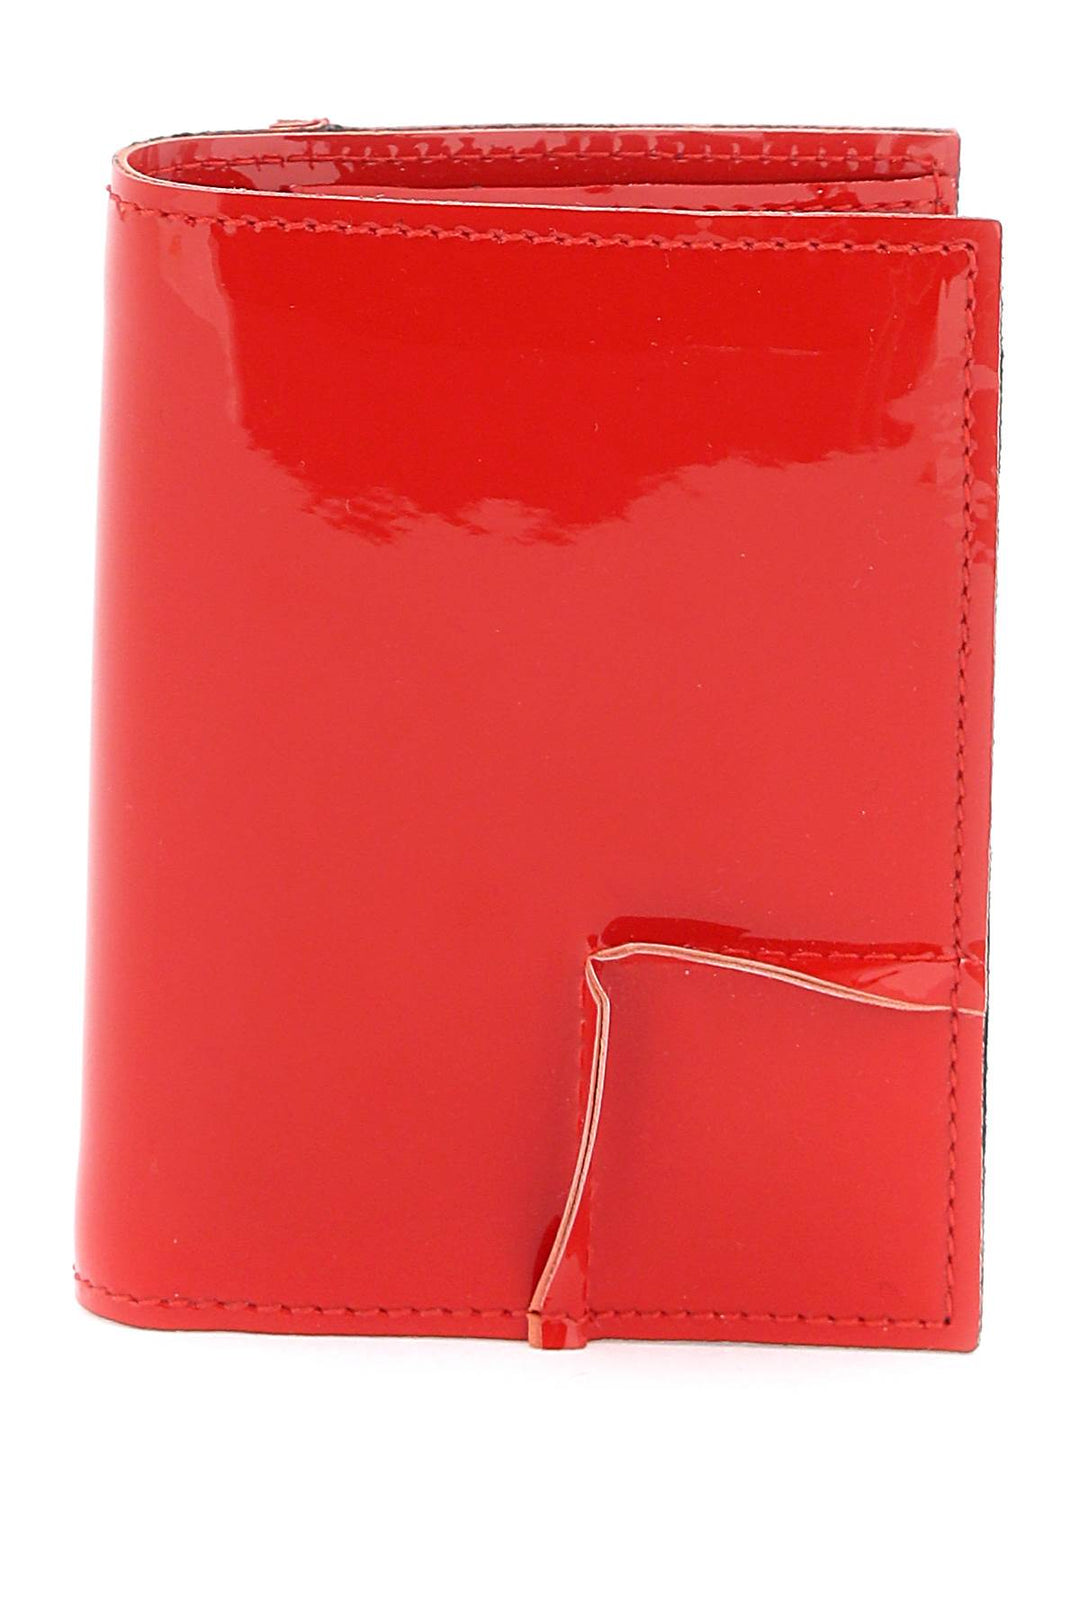 Comme des garcons wallet bifold patent leather wallet in-0